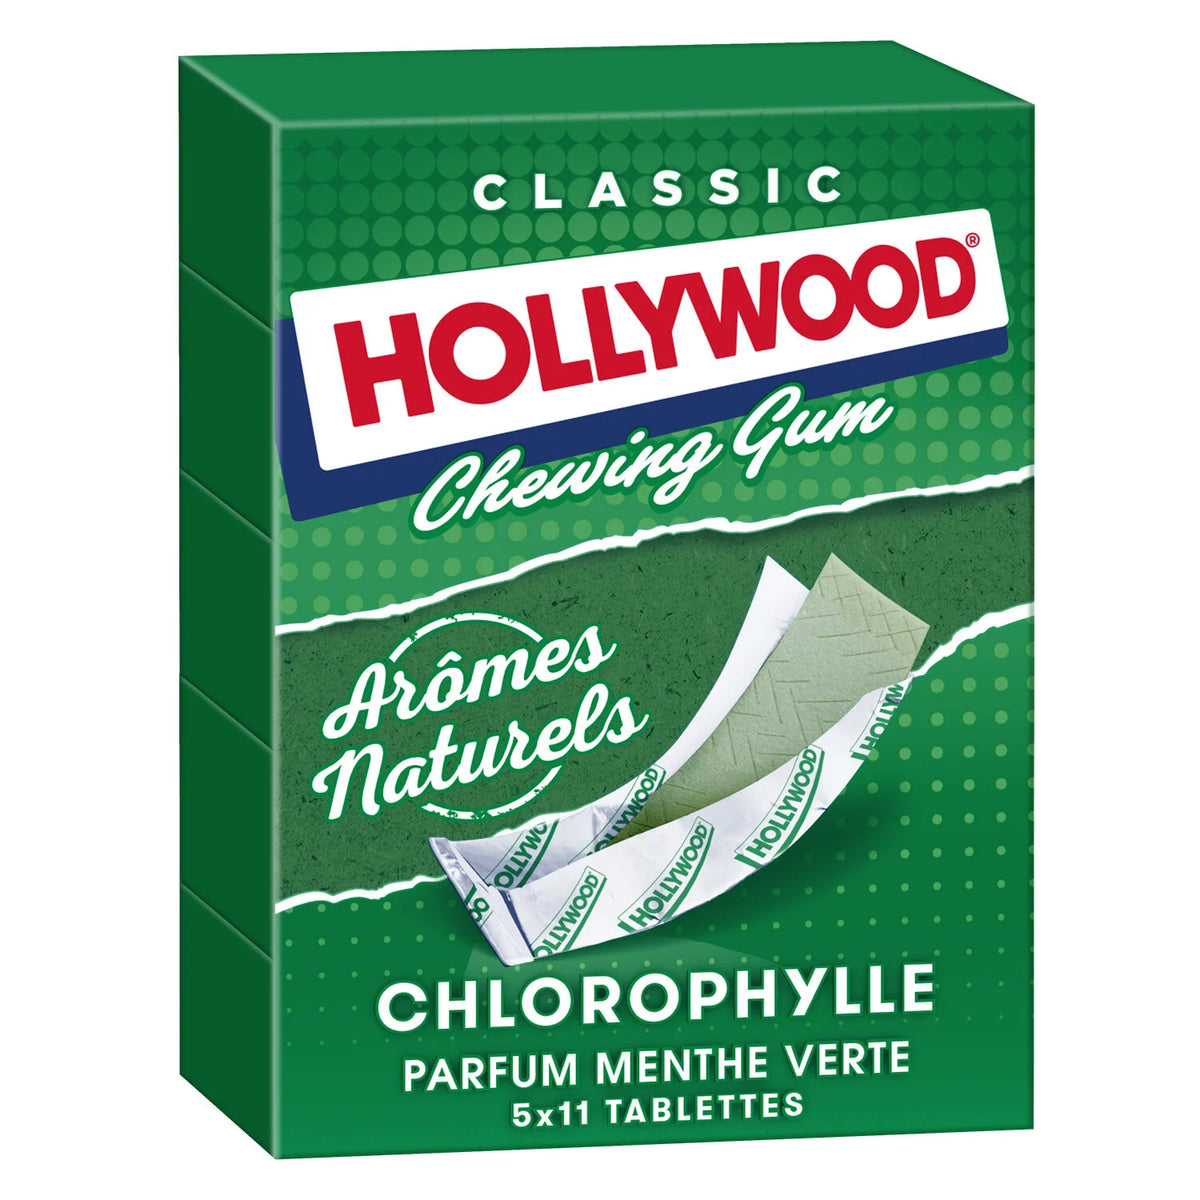 Hollywood Chewing Gum